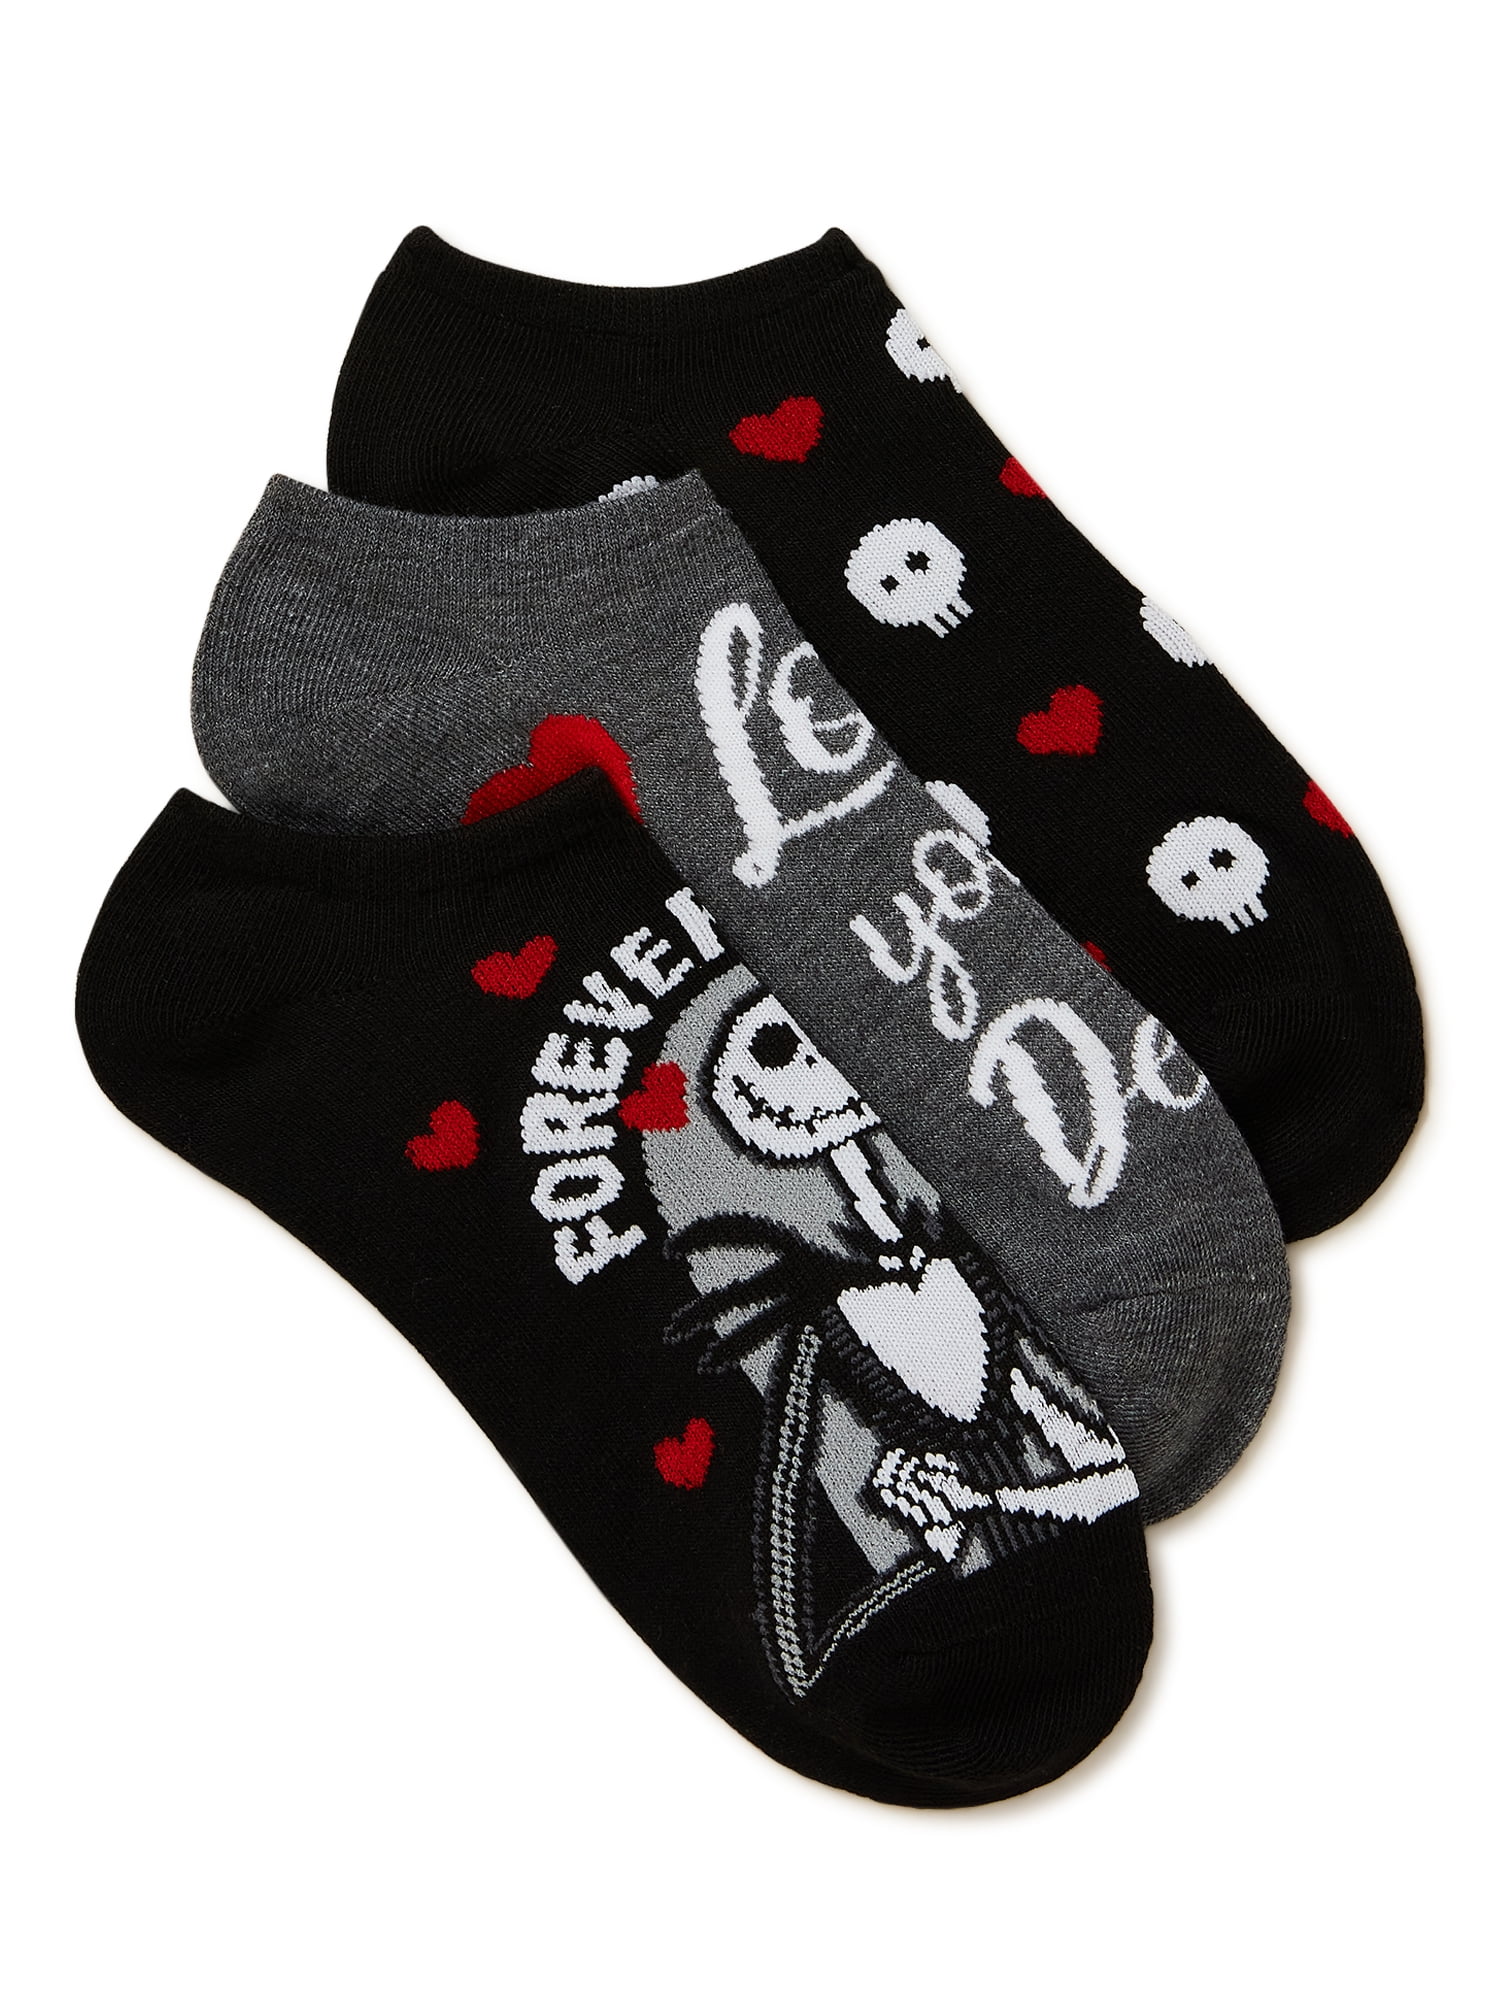 The Nightmare Before Christmas Disney Nightmare Before Christmas, Valentine's Day Women's No-Show Socks, 3-Pack, Size 4-10